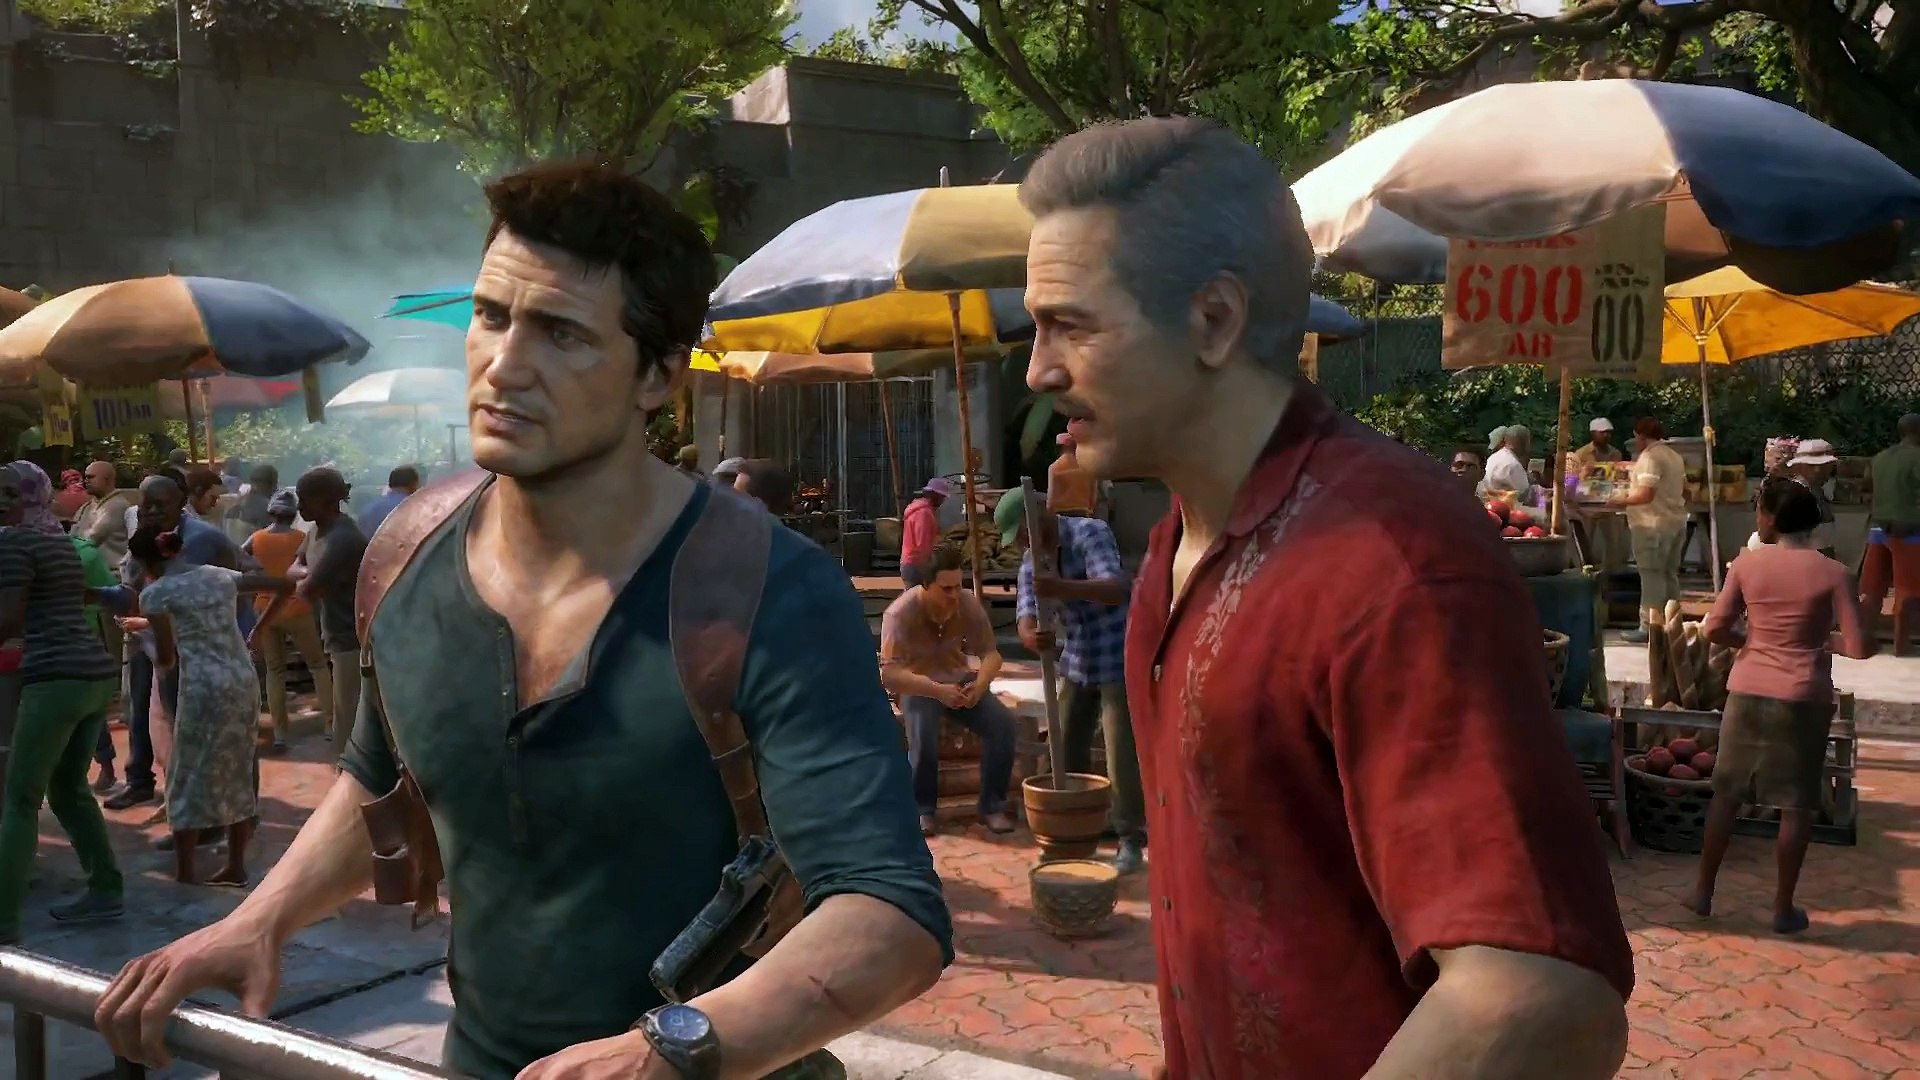 Post-E3 2015] Uncharted 4: A Thief's End - Sam Pursuit Extended